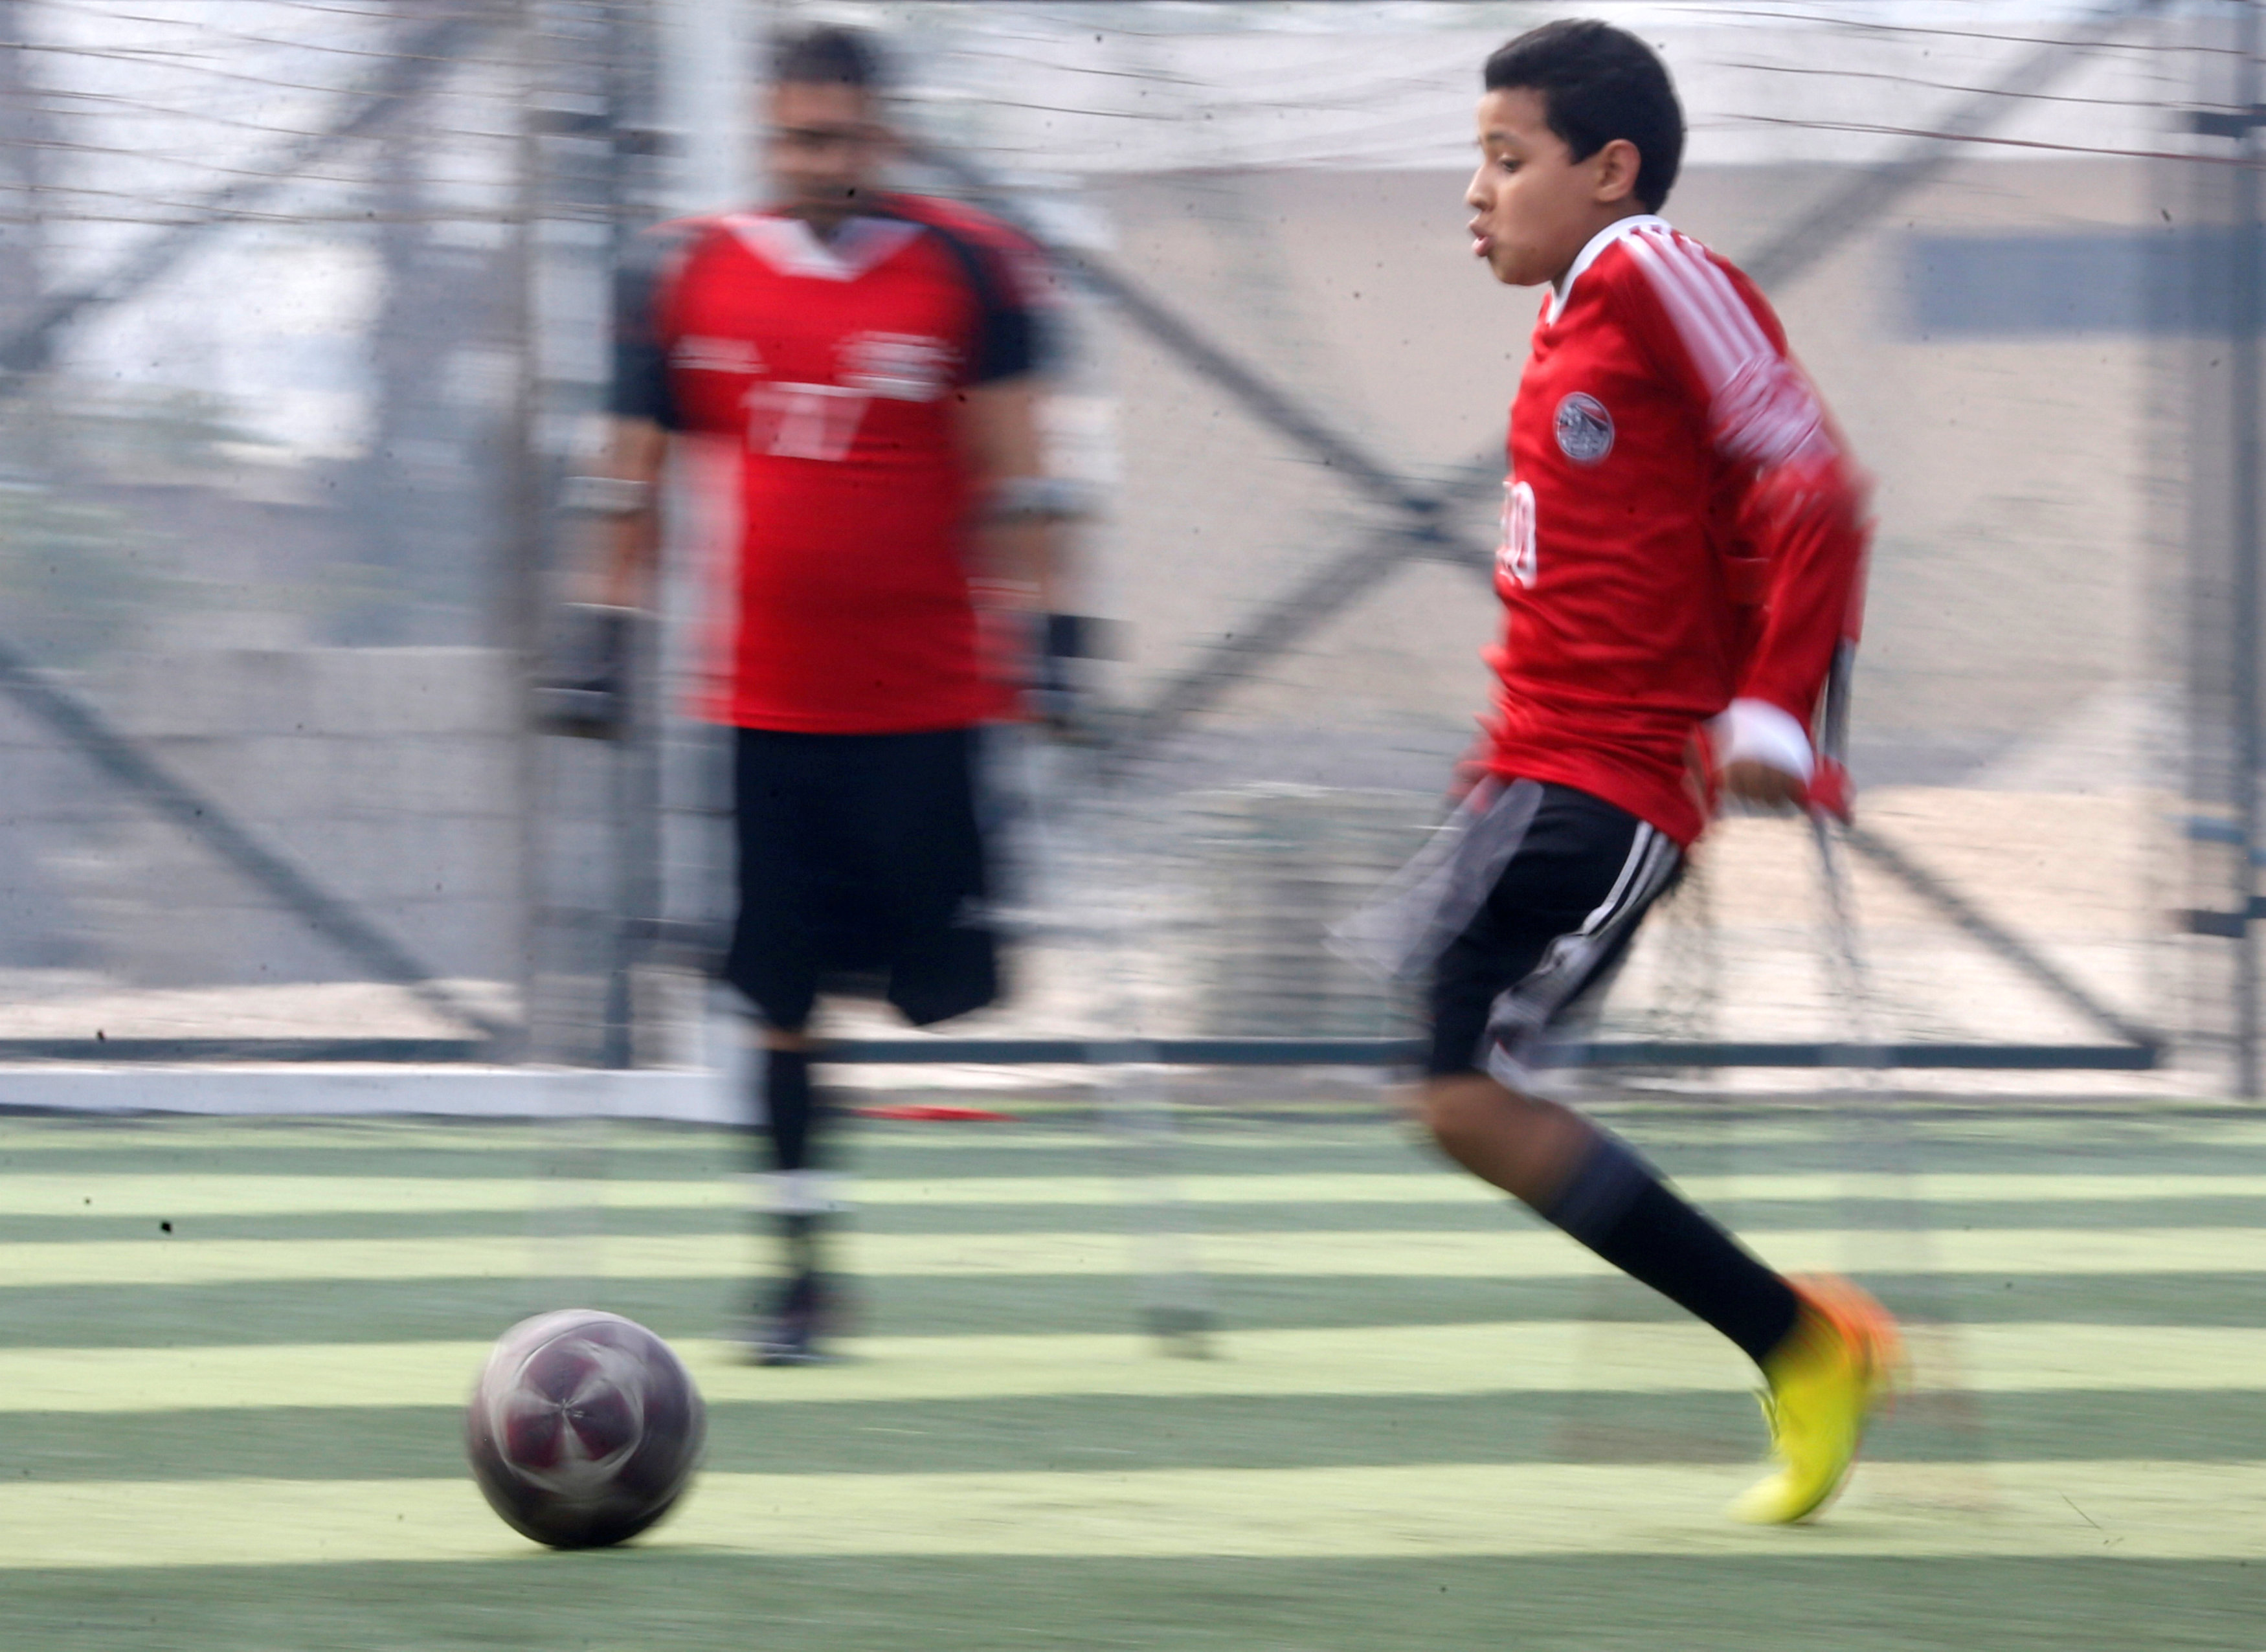 In pictures: 'The Miracle Team' of Egyptian soccer players